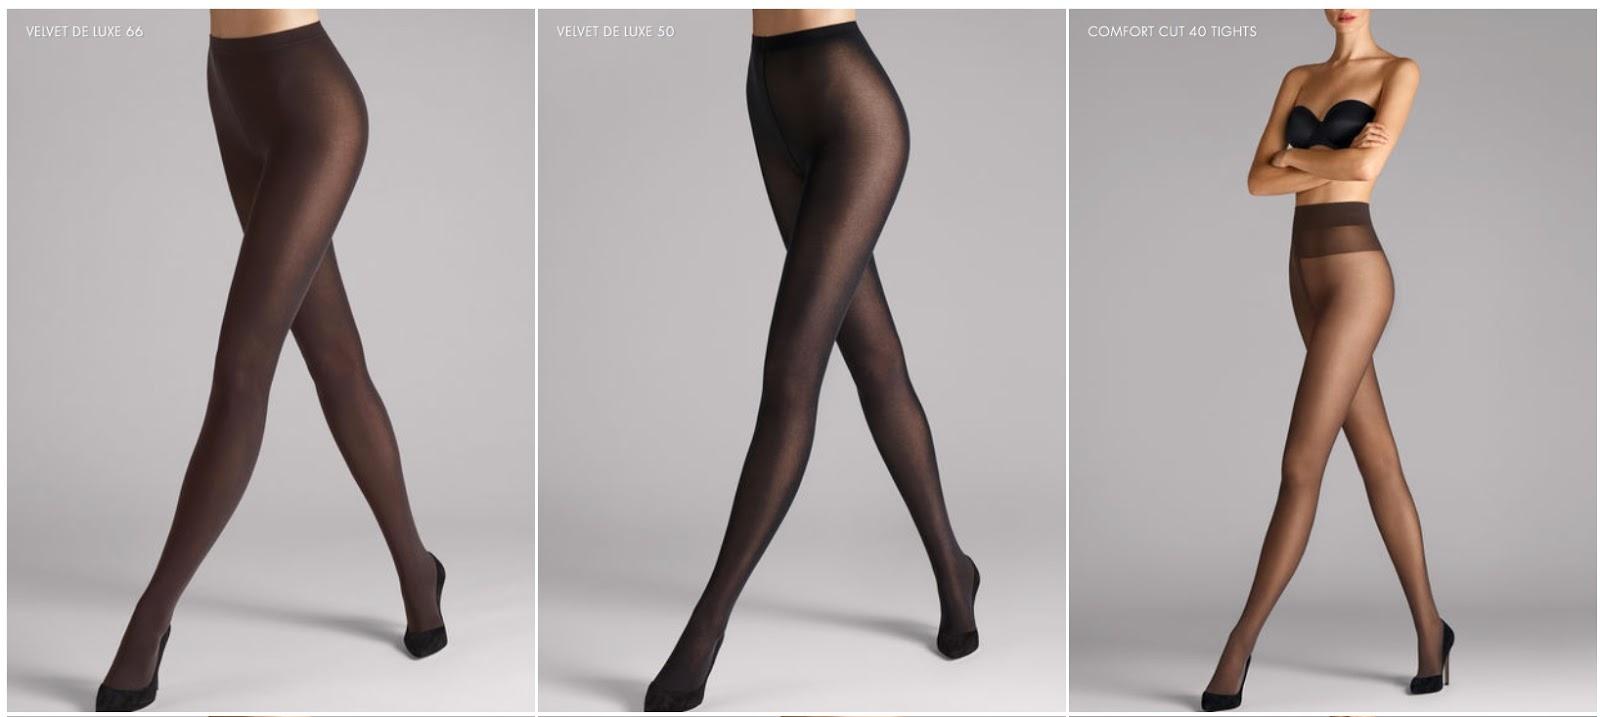 Whiskey reccomend Unisex pantyhose for men and women